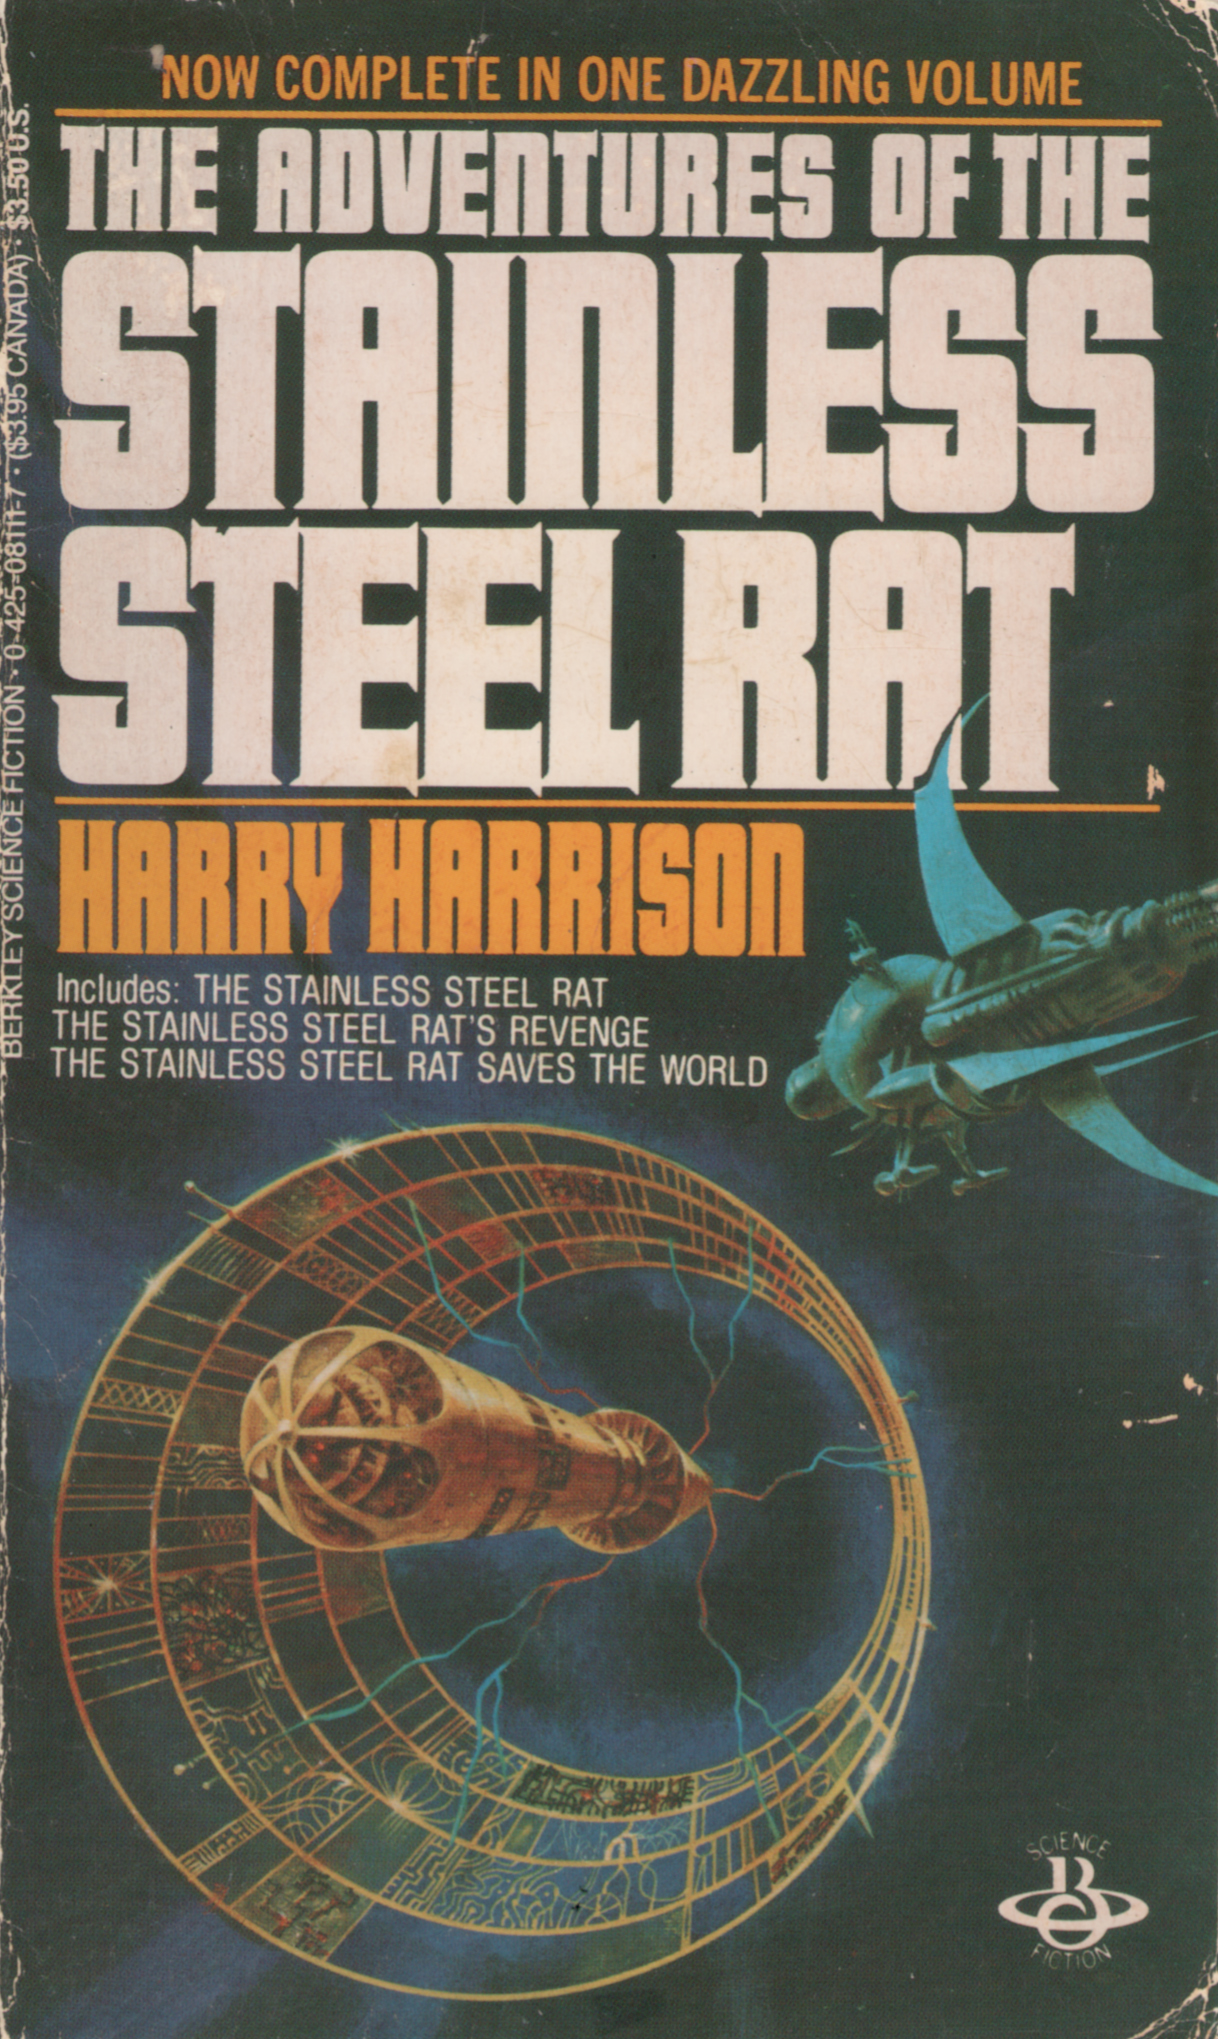 The Stainless Steel Rat by Harry Harrison